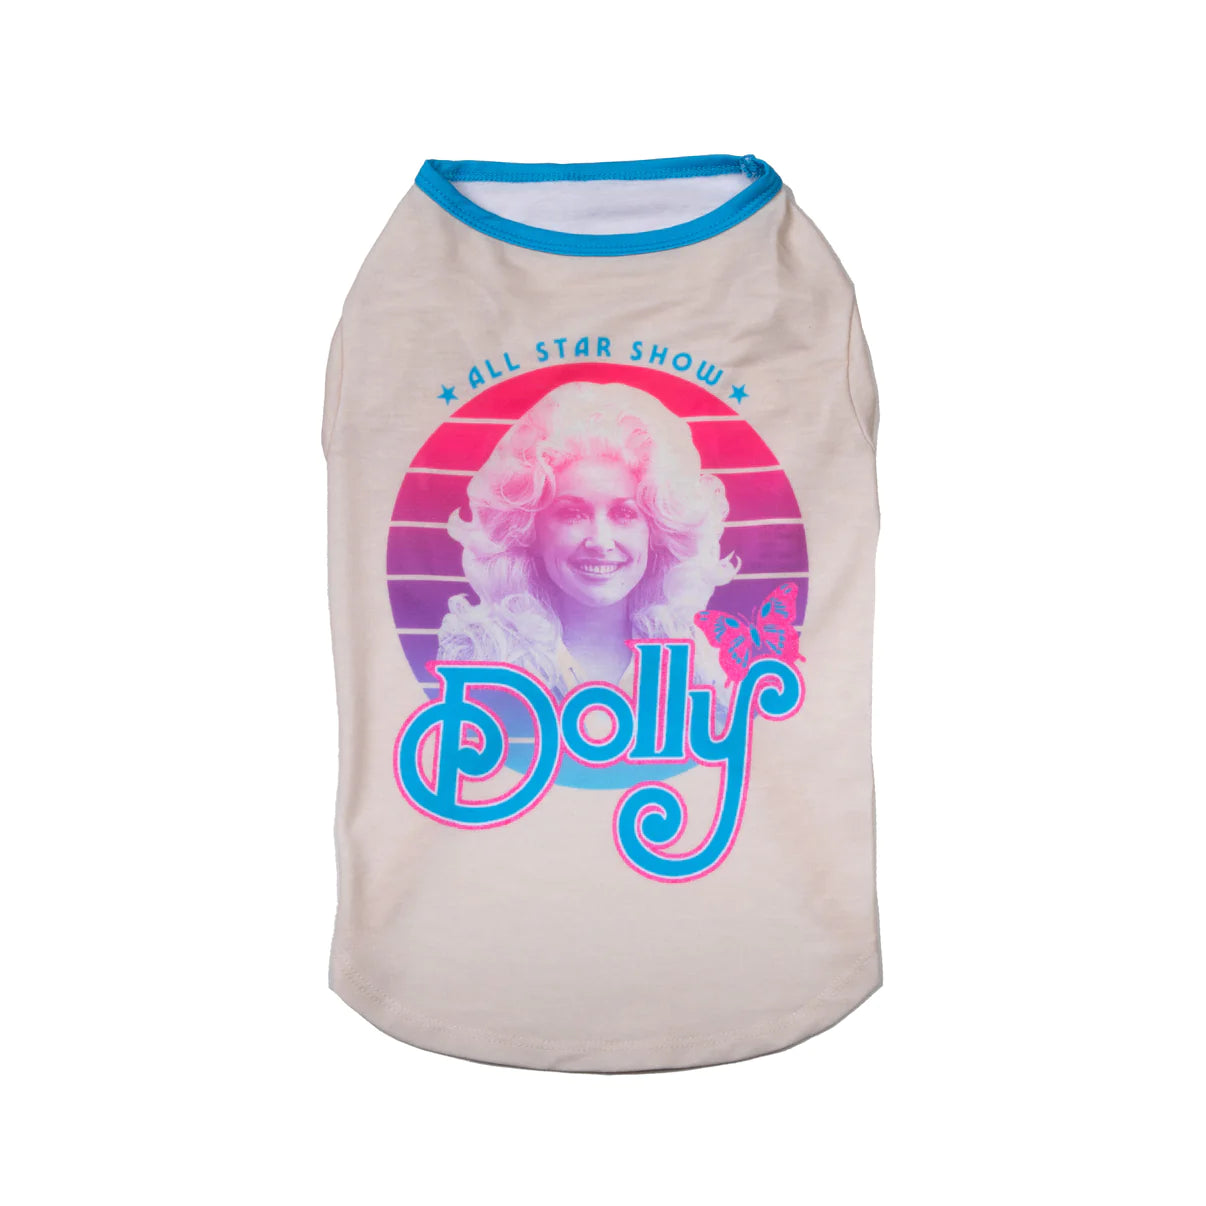 Doggy Parton - White All Star Show Vintage Style Shirt for Pets